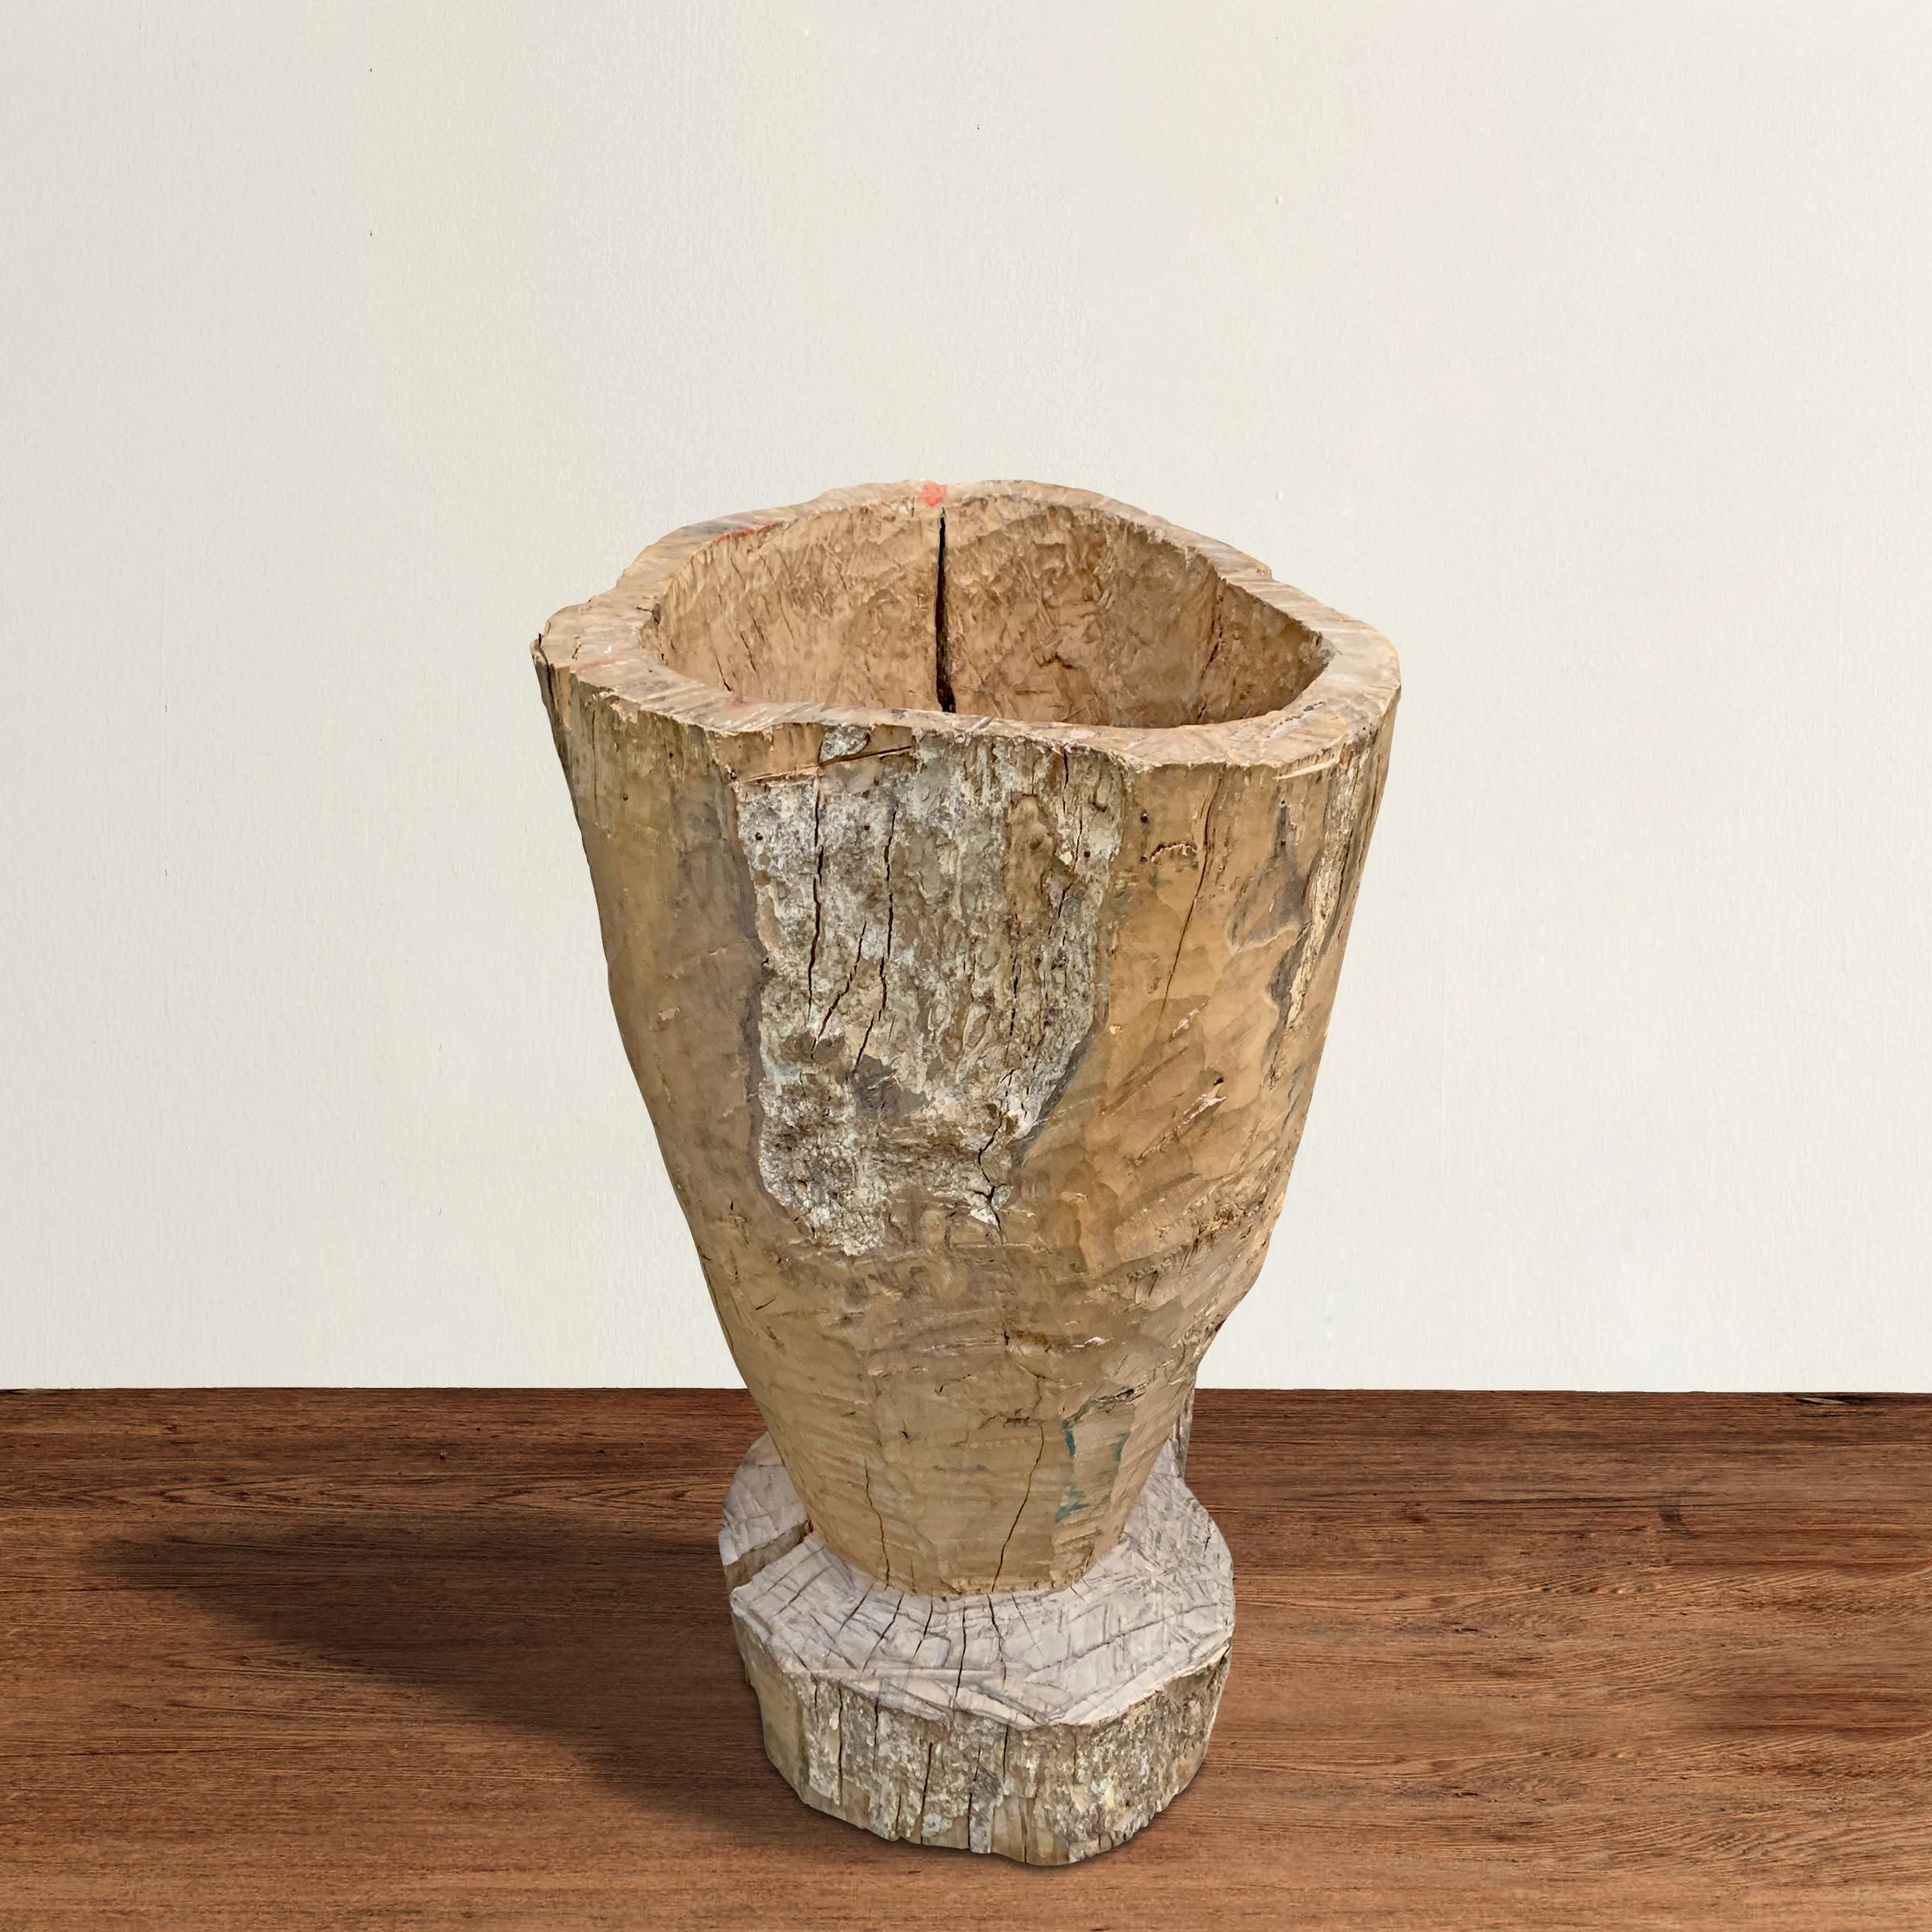 A large 19th century Central American wooden mortar with a beautifully hand-hewn texture and a well worn finish. Mortars like these were used to crush grains, spices, herbs, and other foodstuffs, but today it's perfect for holding logs next to your